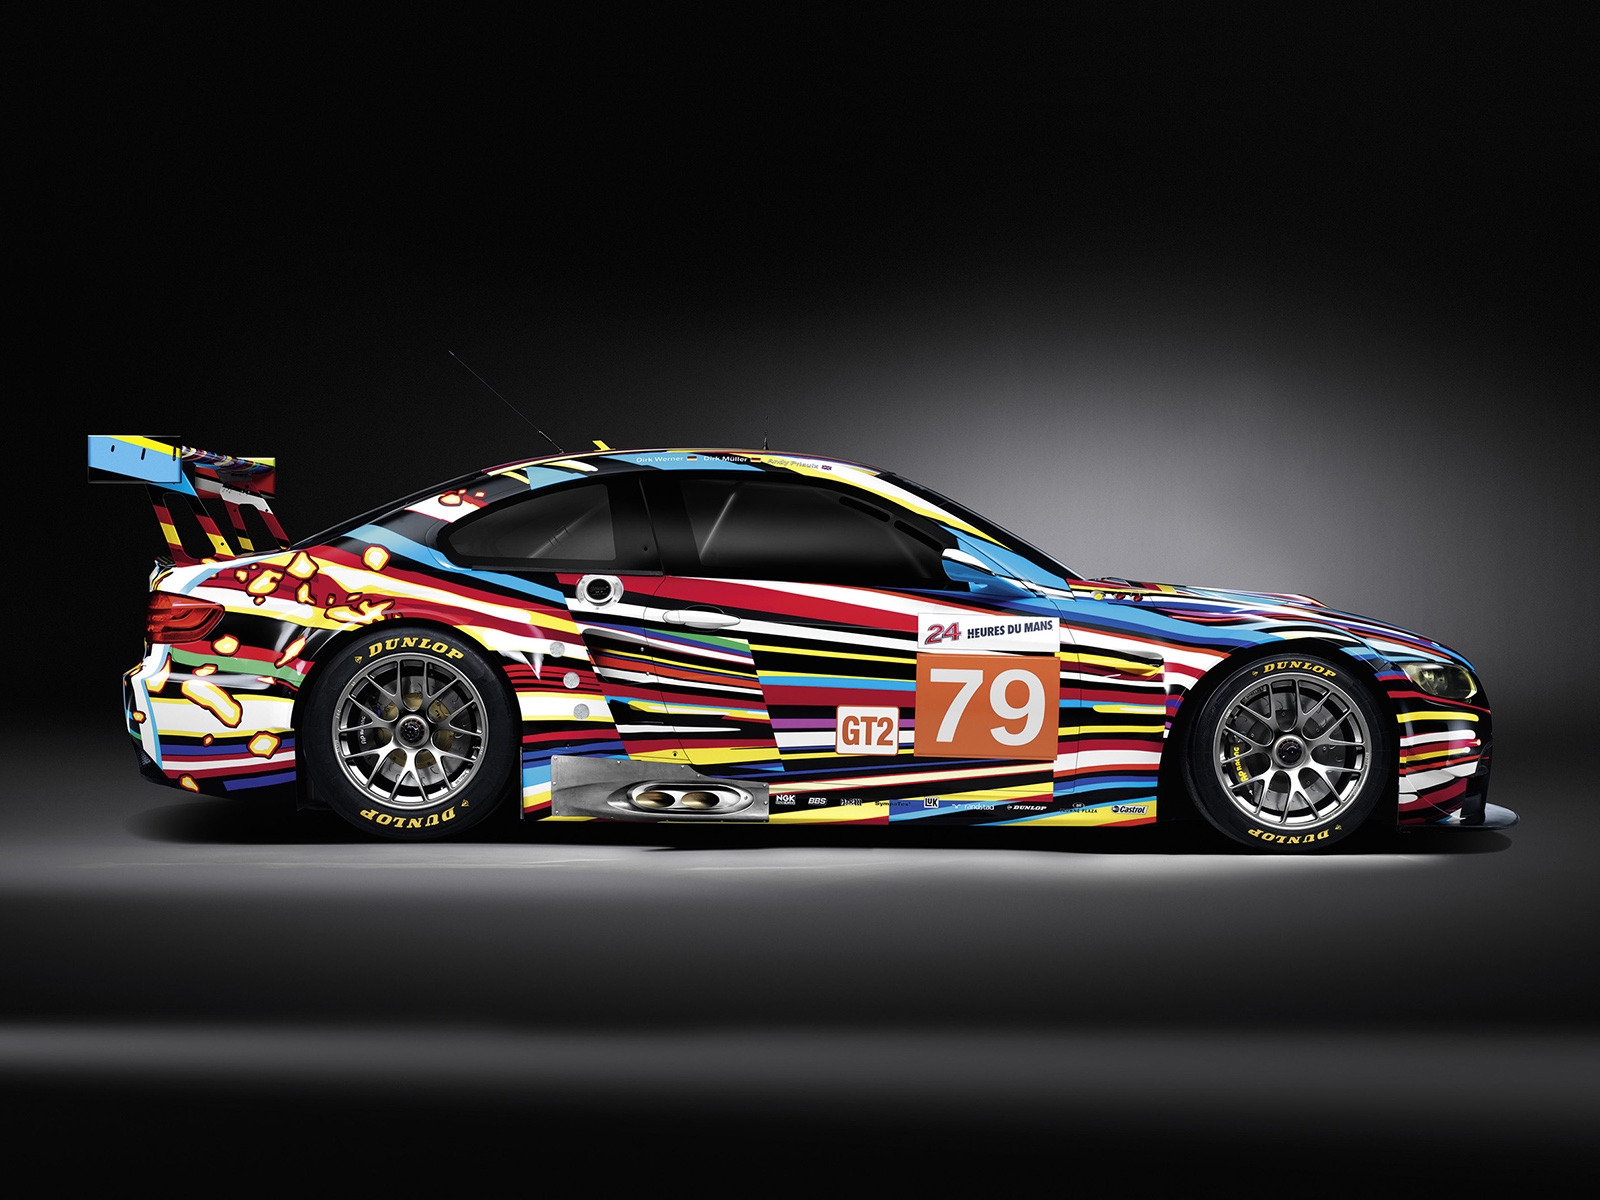 BMW M3 GT 2 Art Side for 1600 x 1200 resolution